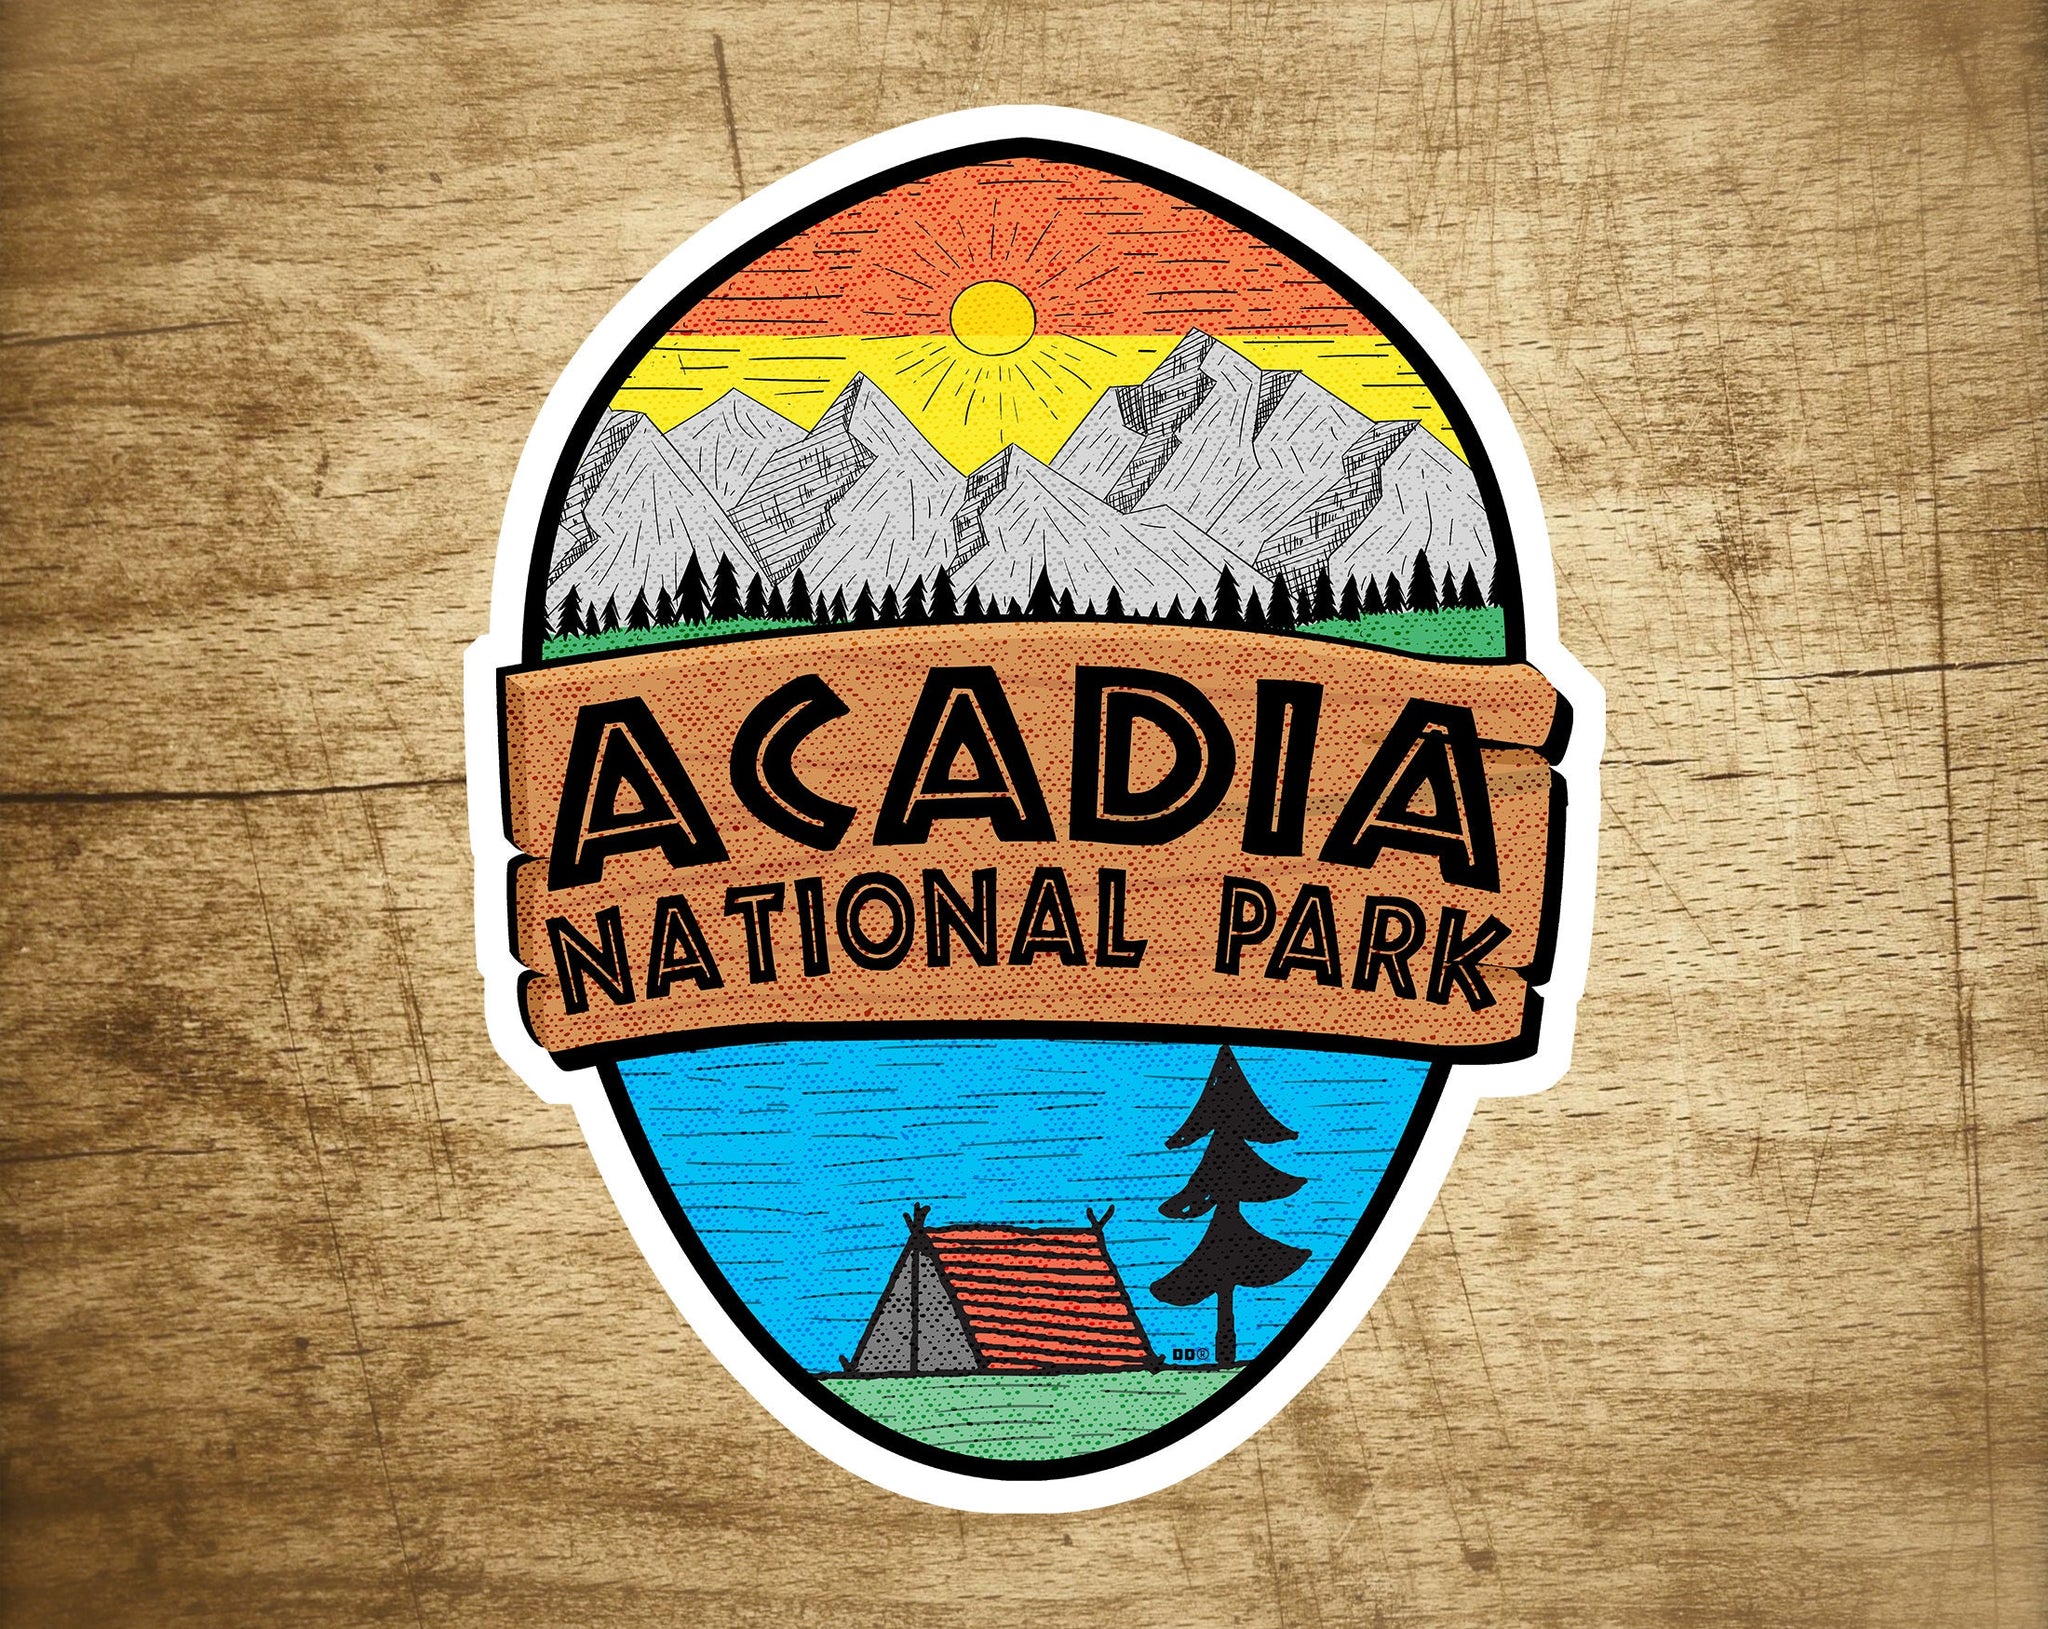 Acadia National Park Maine Sticker Decal 3.5" x 2.8" Vinyl New Distressed Camping